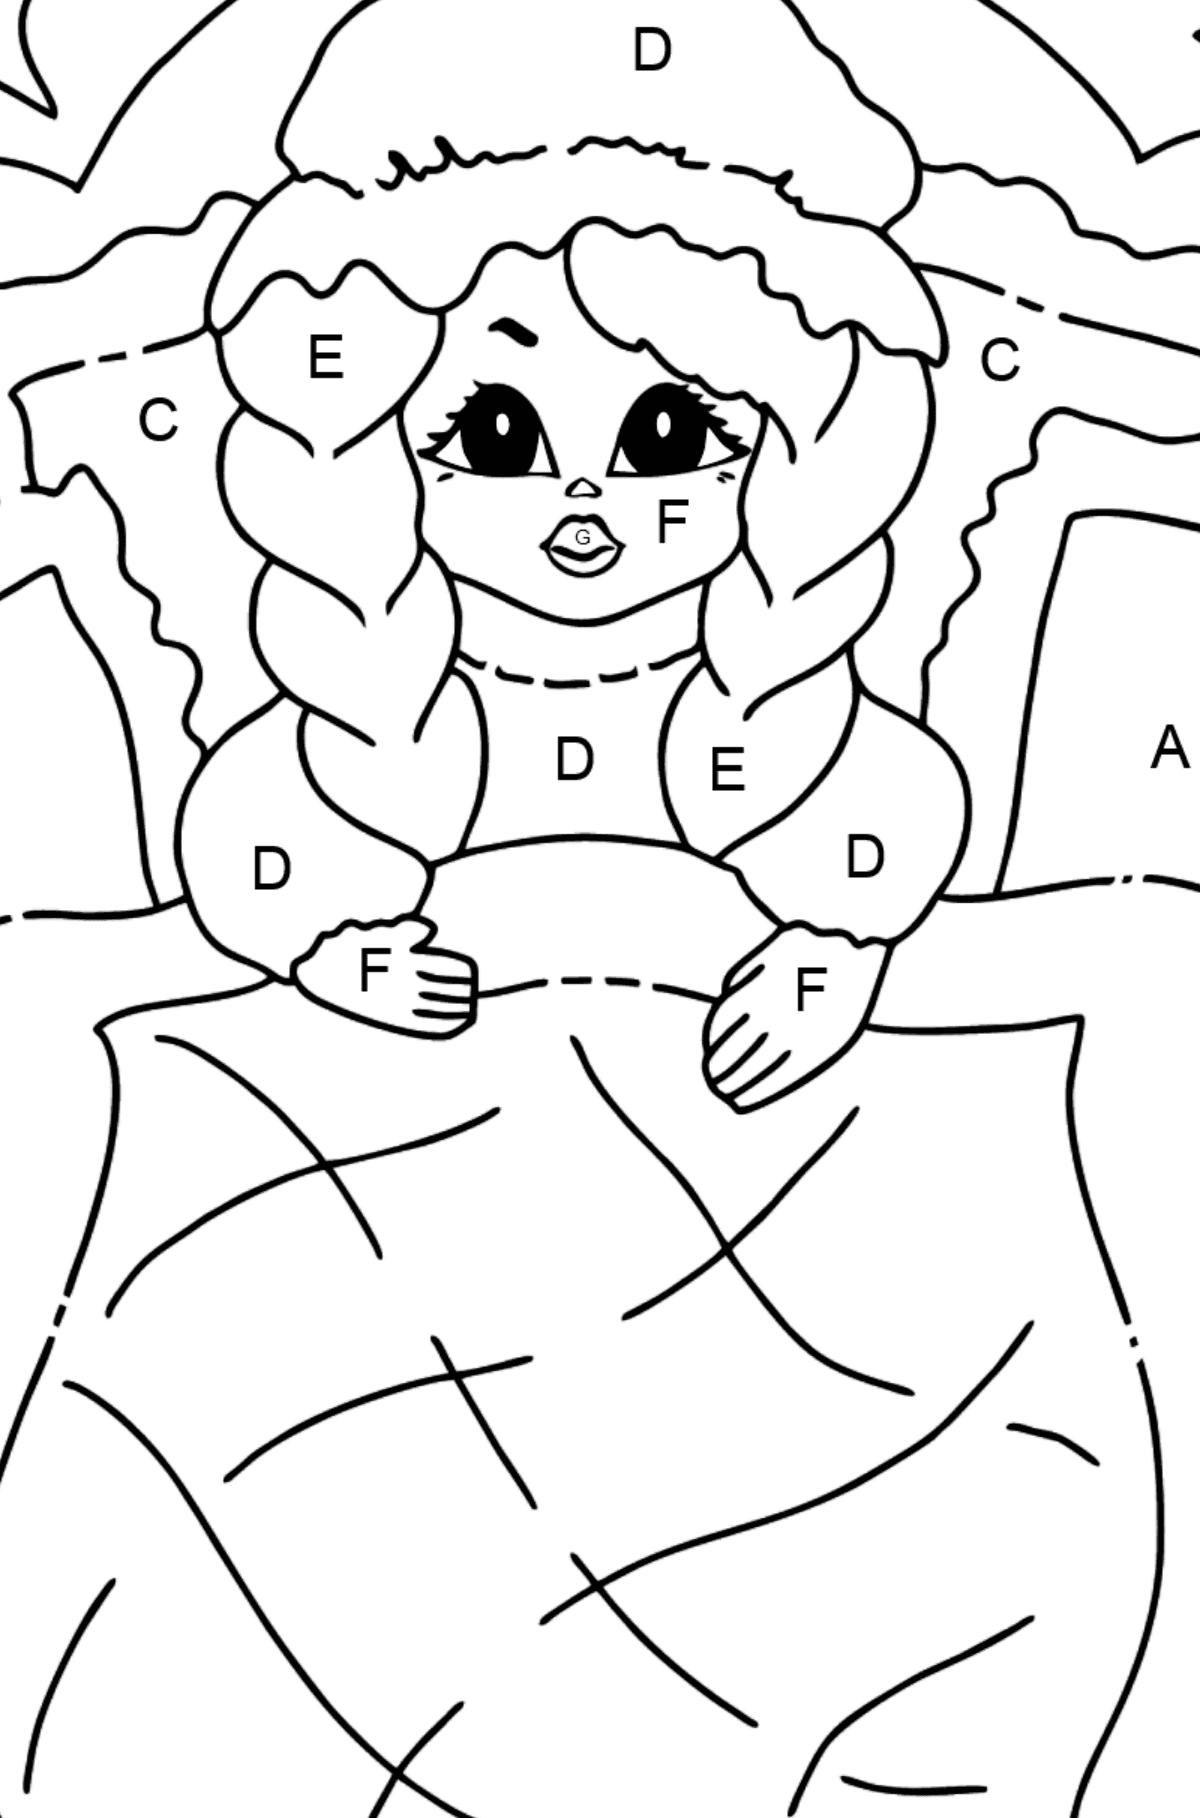 Coloring Picture - A Princess in Bed - Coloring by Letters for Kids